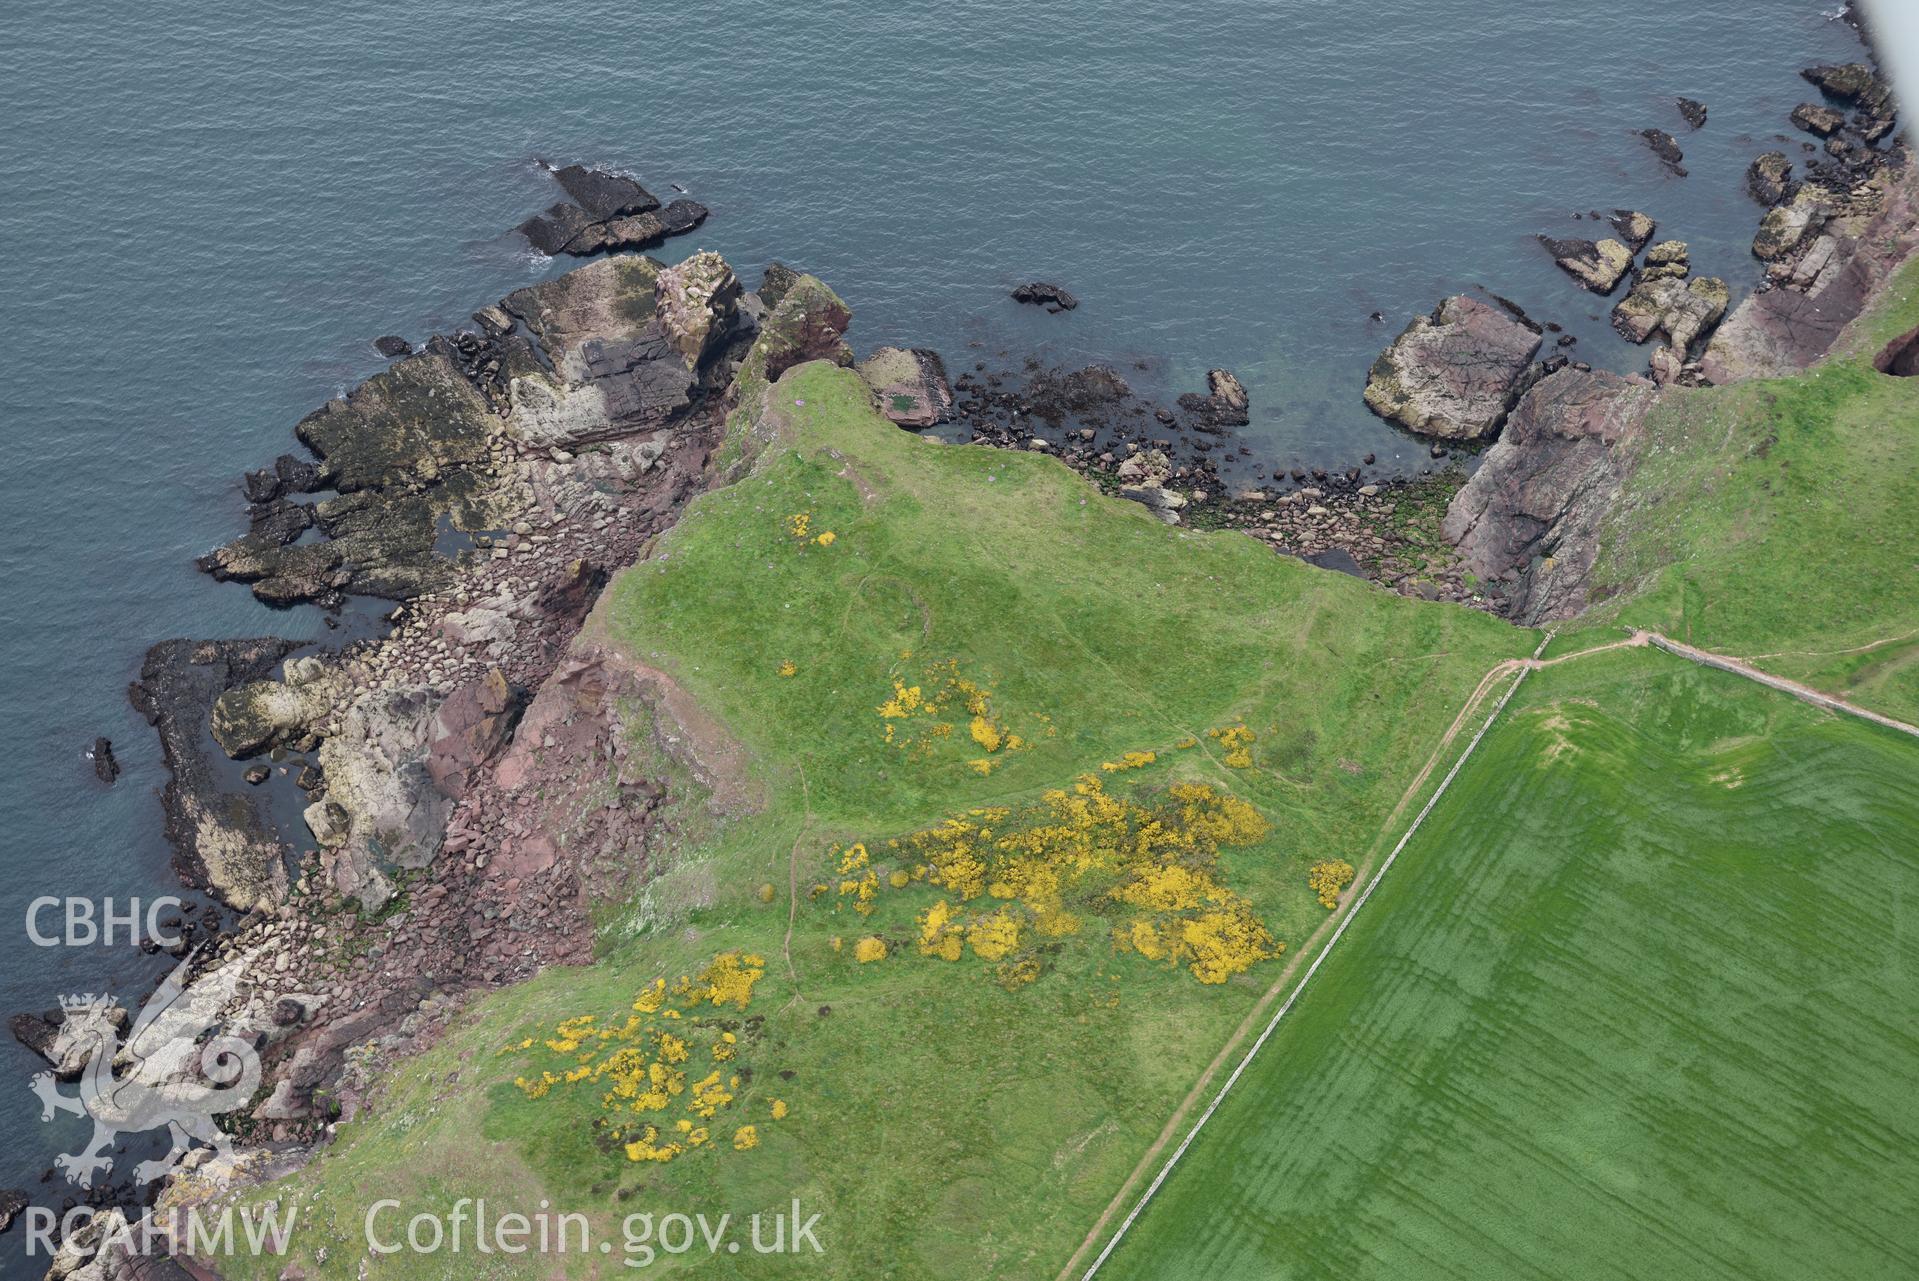 Tower Point Rath. Baseline aerial reconnaissance survey for the CHERISH Project. ? Crown: CHERISH PROJECT 2017. Produced with EU funds through the Ireland Wales Co-operation Programme 2014-2020. All material made freely available through the Open Government Licence.